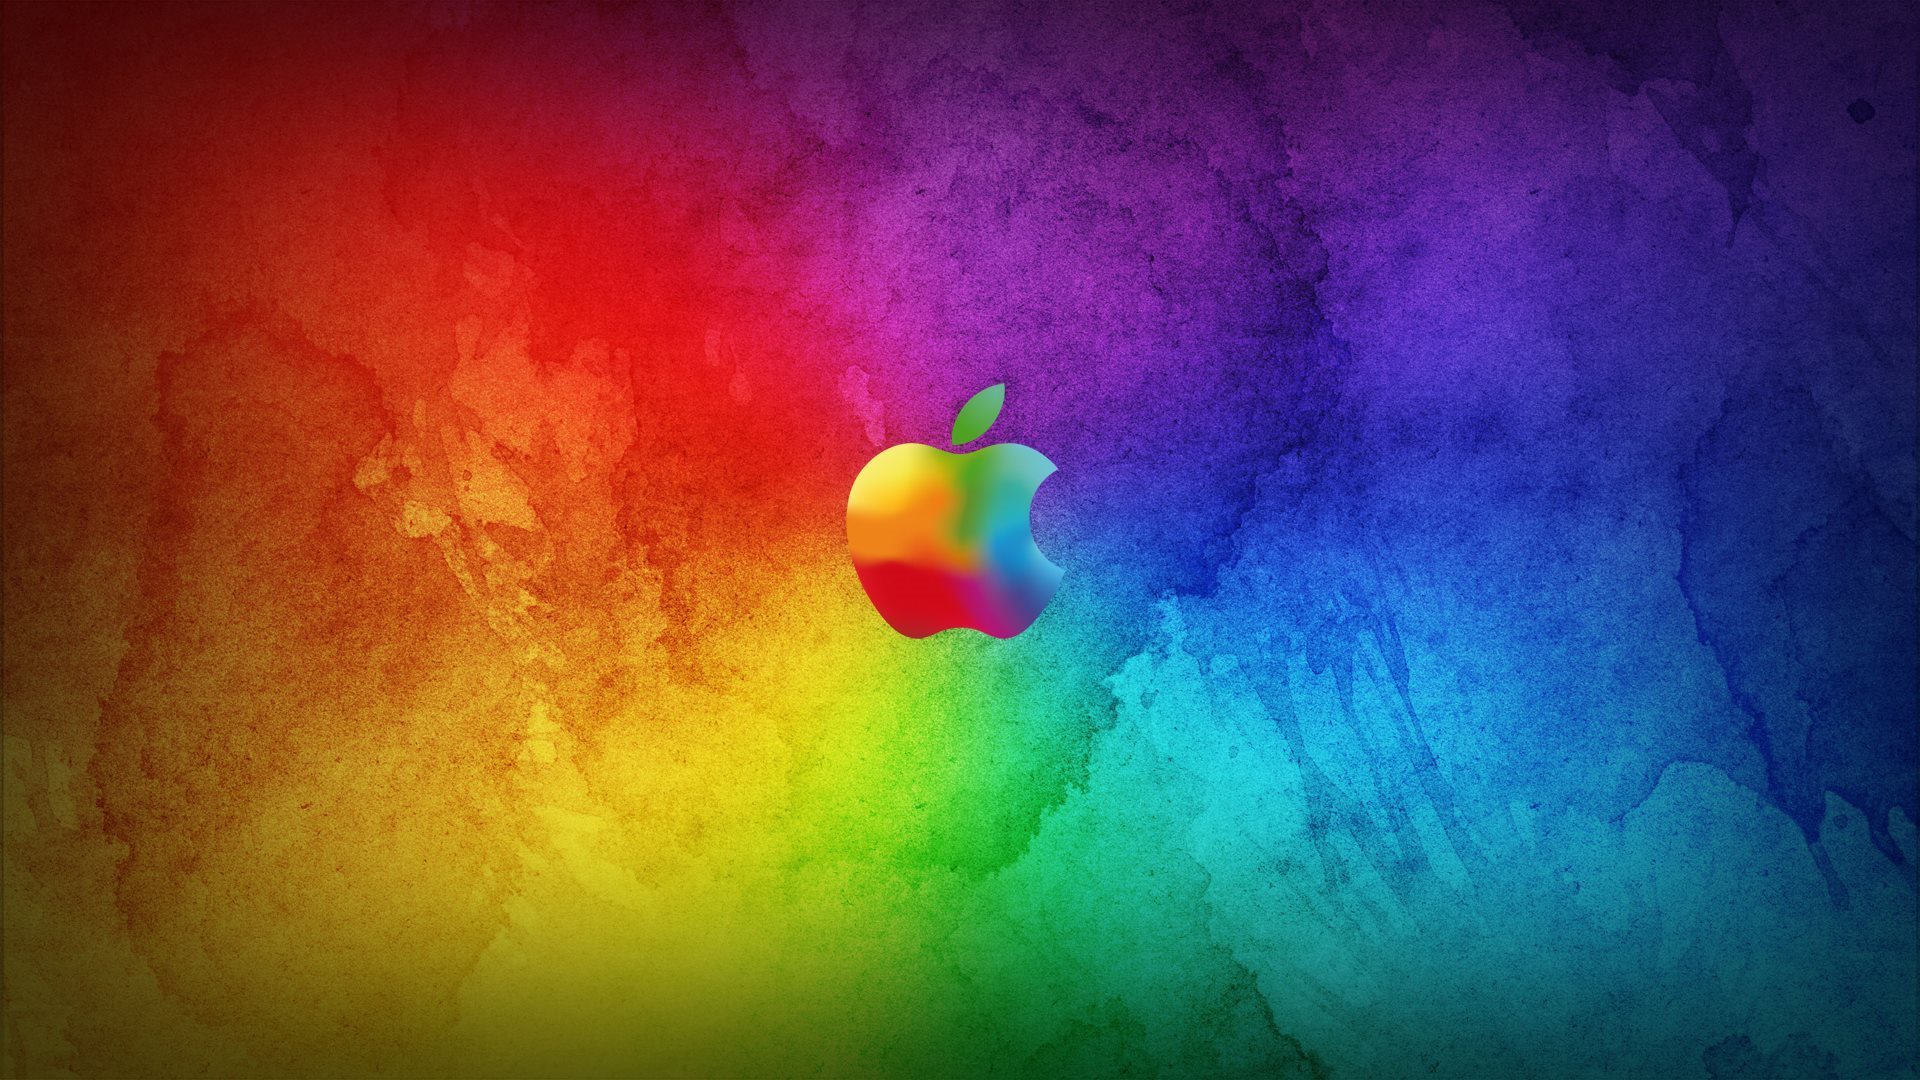 Cool Apple Logo Wallpaper Hd Images amp Pictures   Becuo